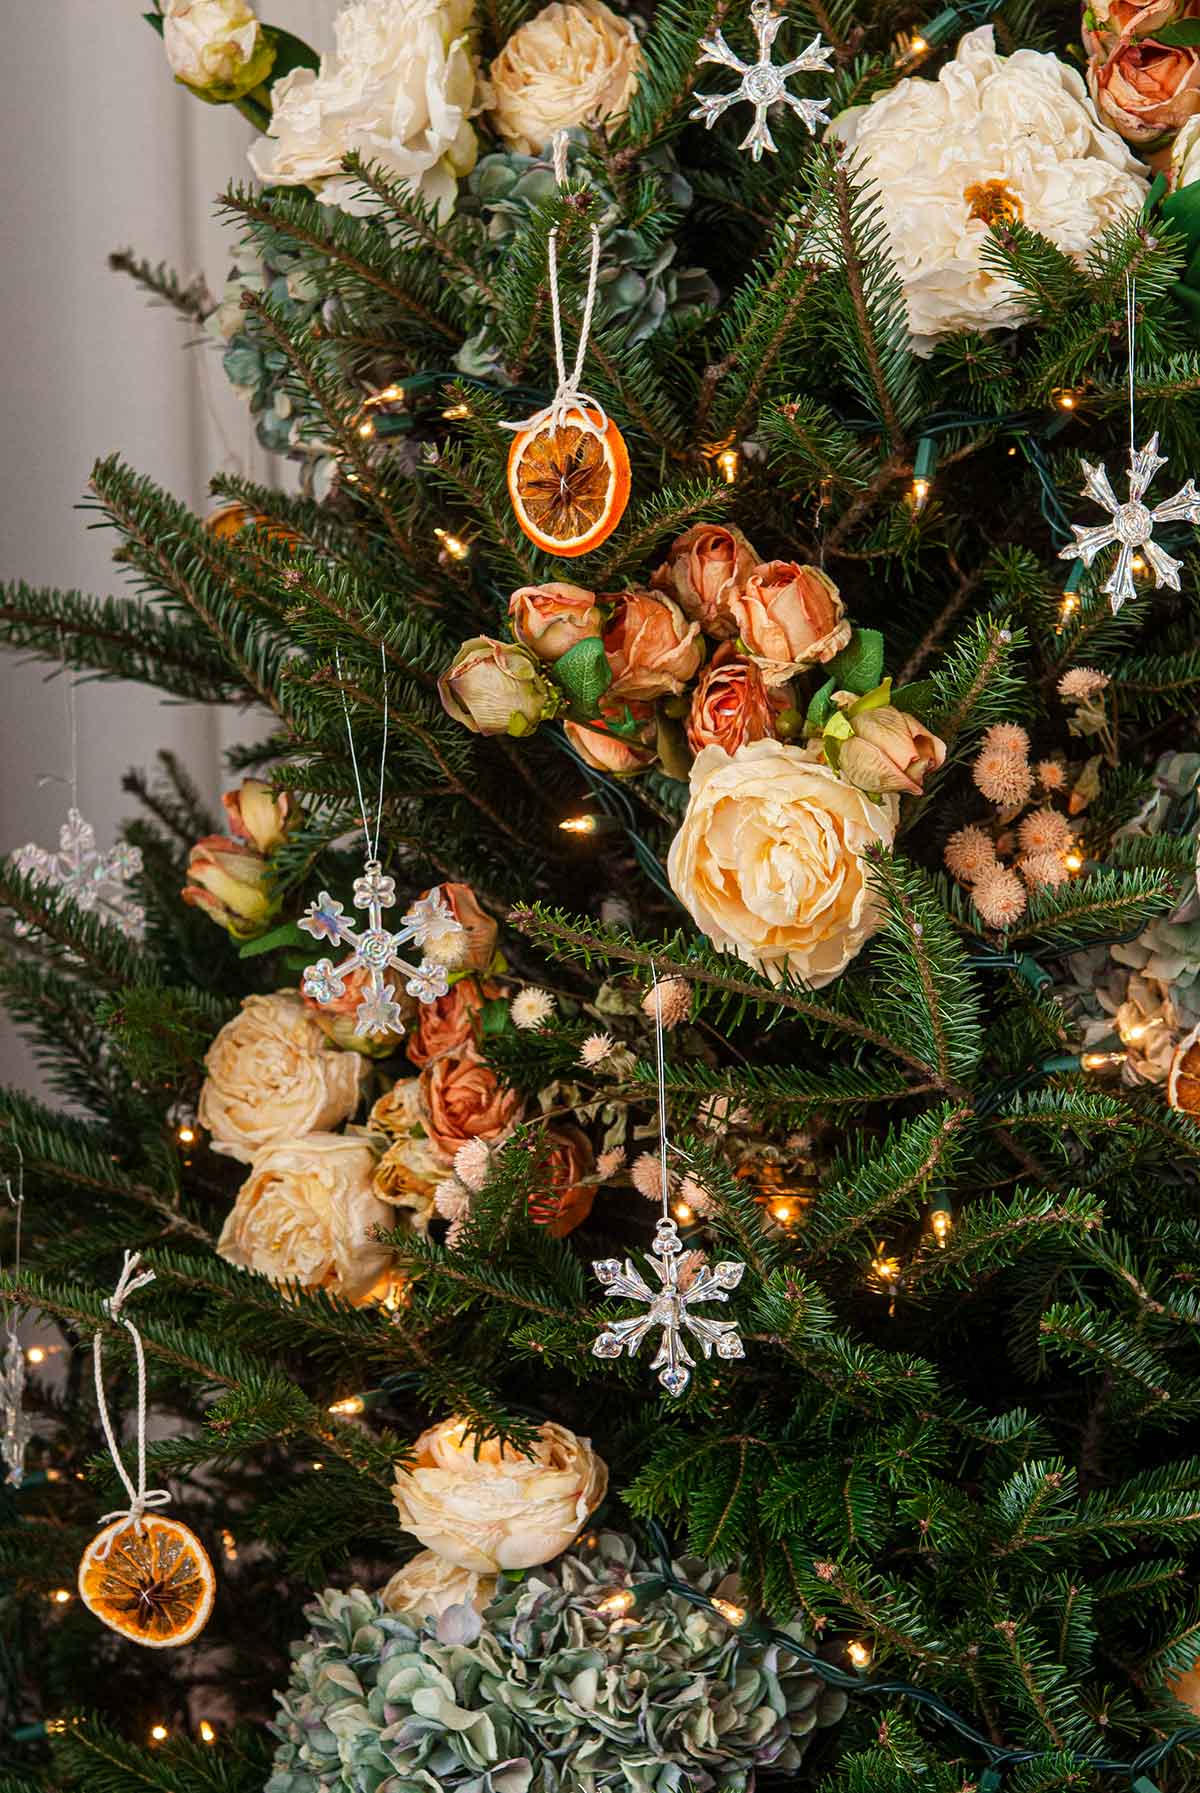 A Christmas tree decorated with lights, fake flowers, orange slices and glass snow flakes.